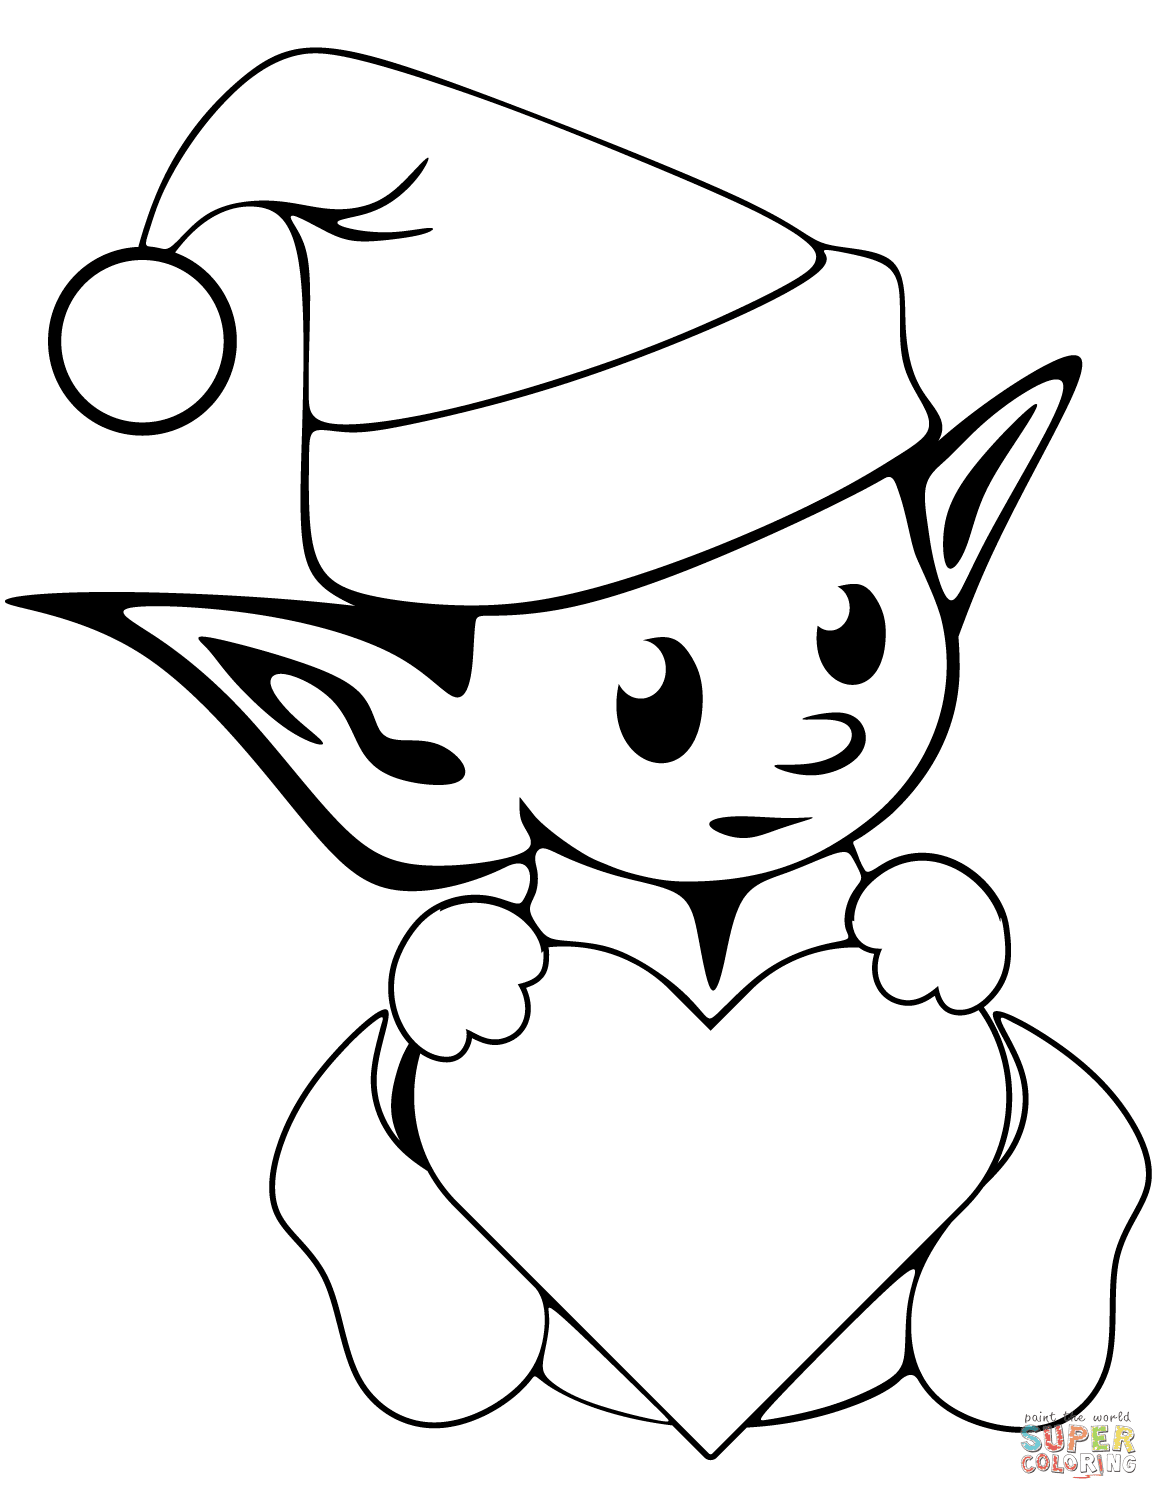 Elf Pictures To Color | Coloringnori - Coloring Pages for Kids